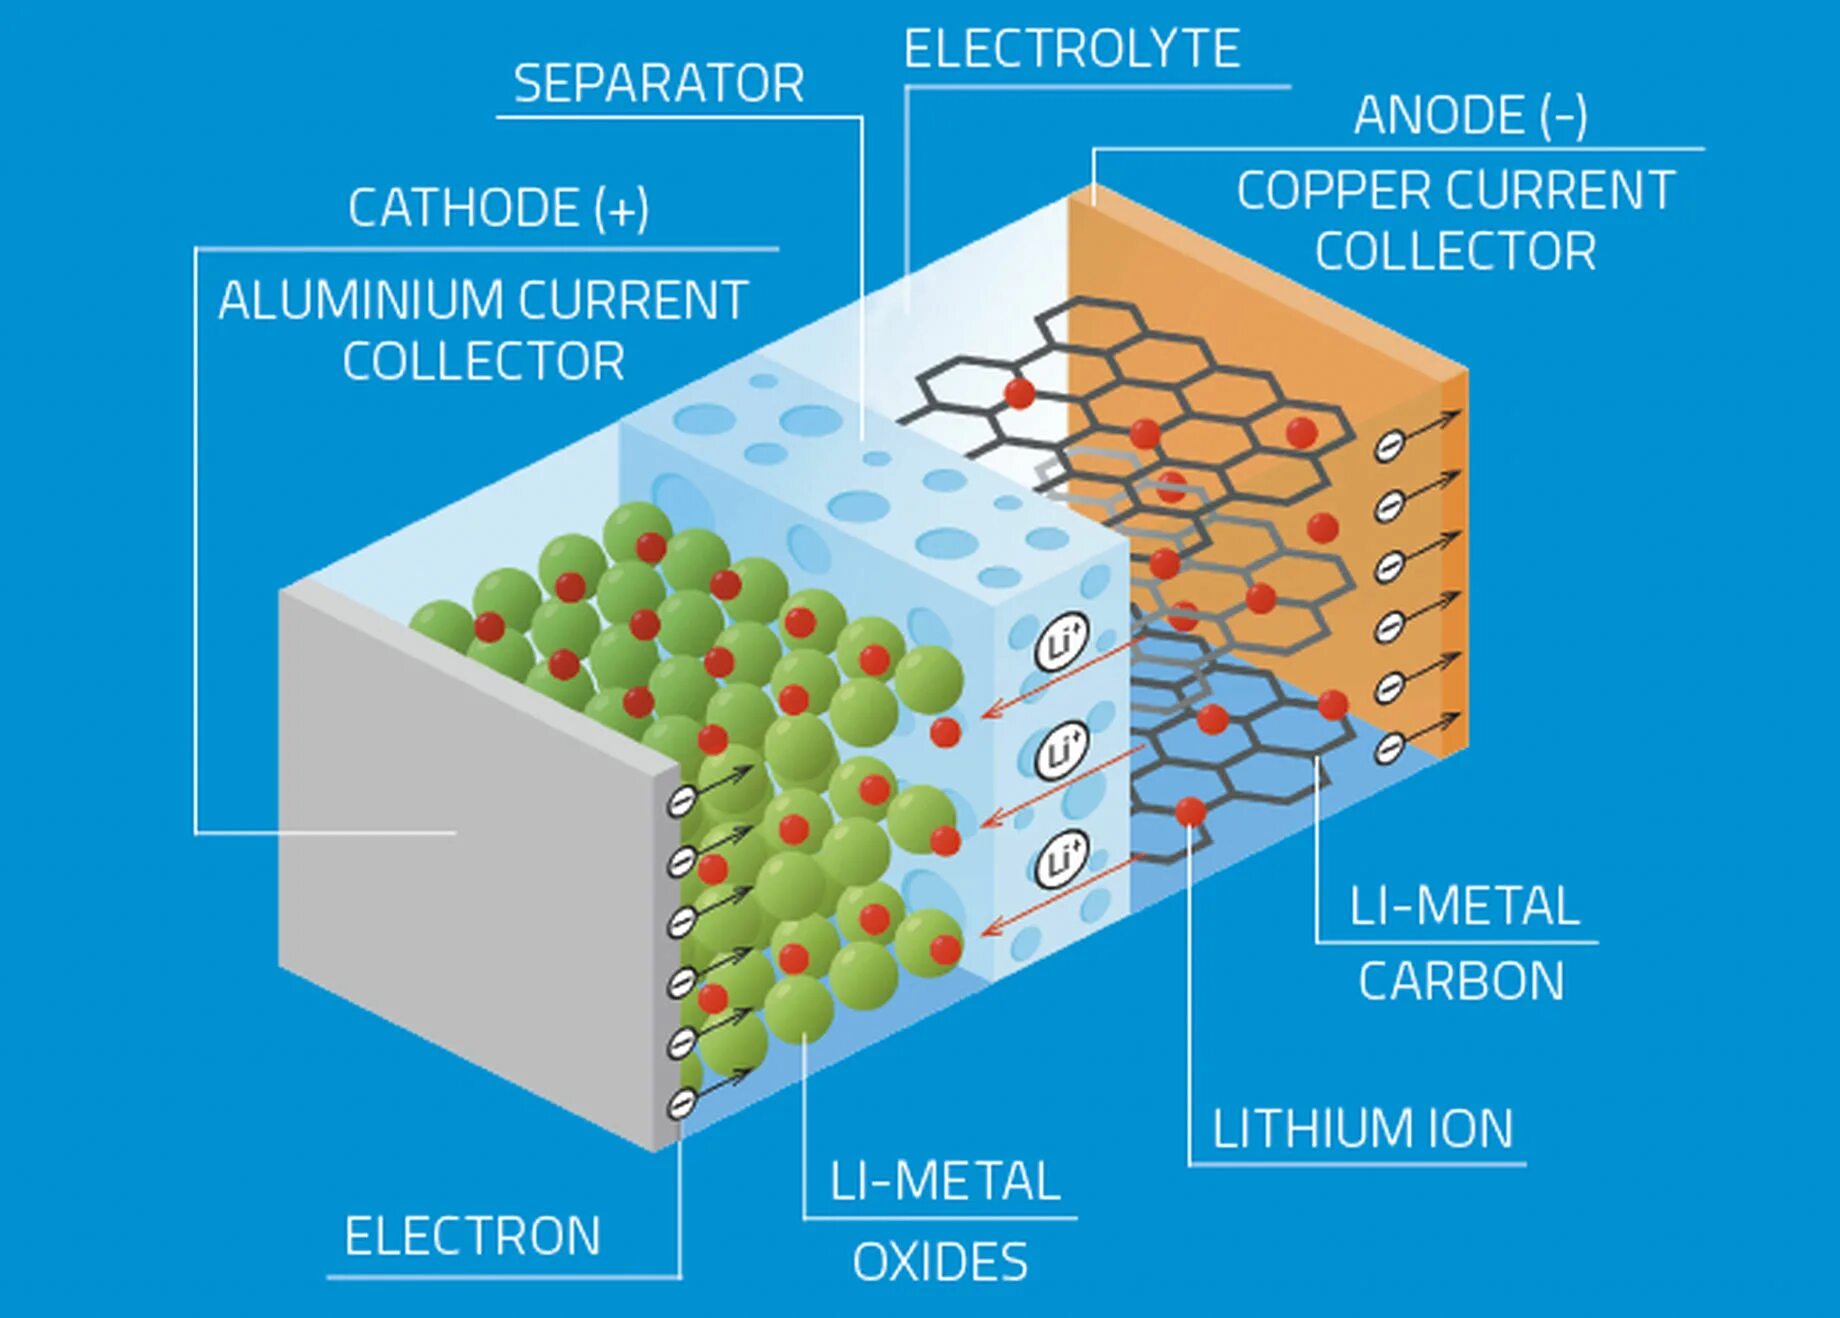 Lithium ion Battery. Lithium ion Batteries recucling. Li ion Battery Laboratory. The structure of the Lithium ion Battery. Battery materials